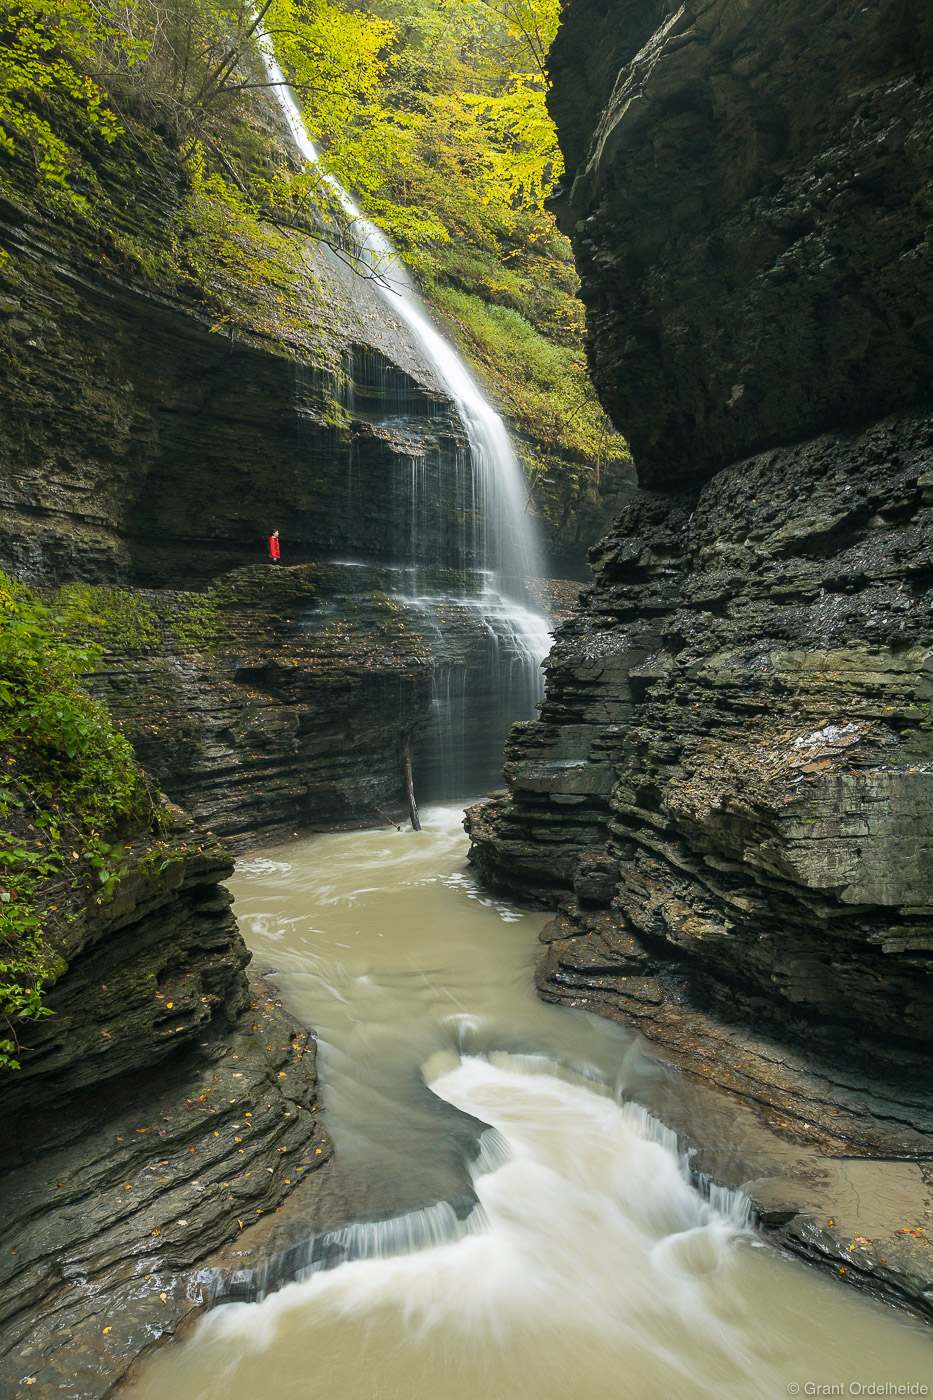 A hiker along the Gorge Trail in New York's Watkins Glen State Park.